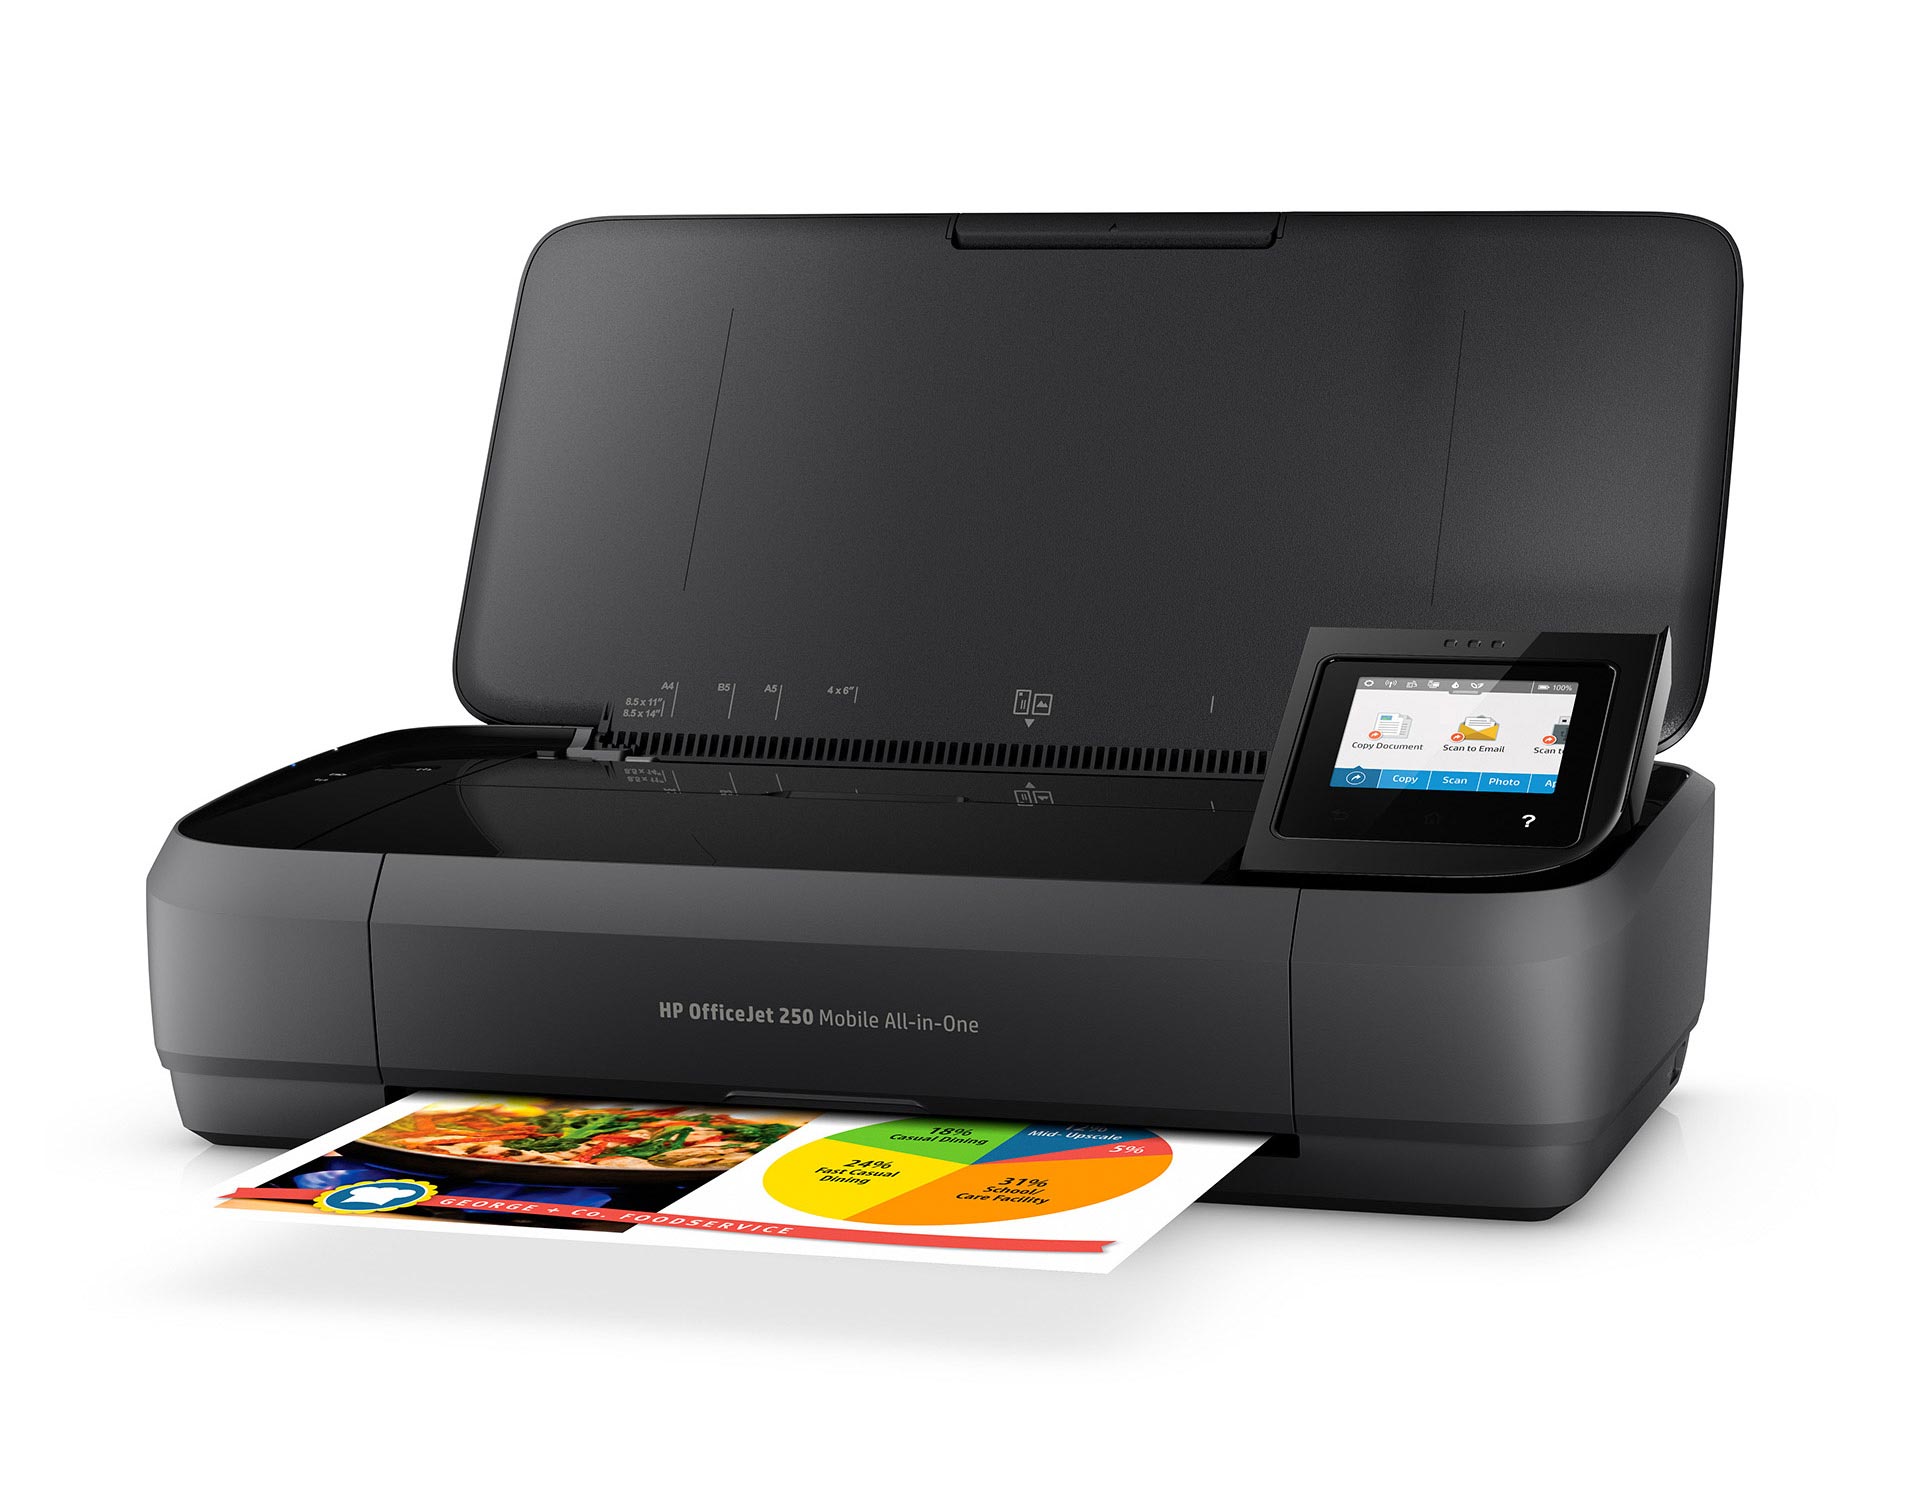 HP OfficeJet 250 Mobile All-in-one プリンター